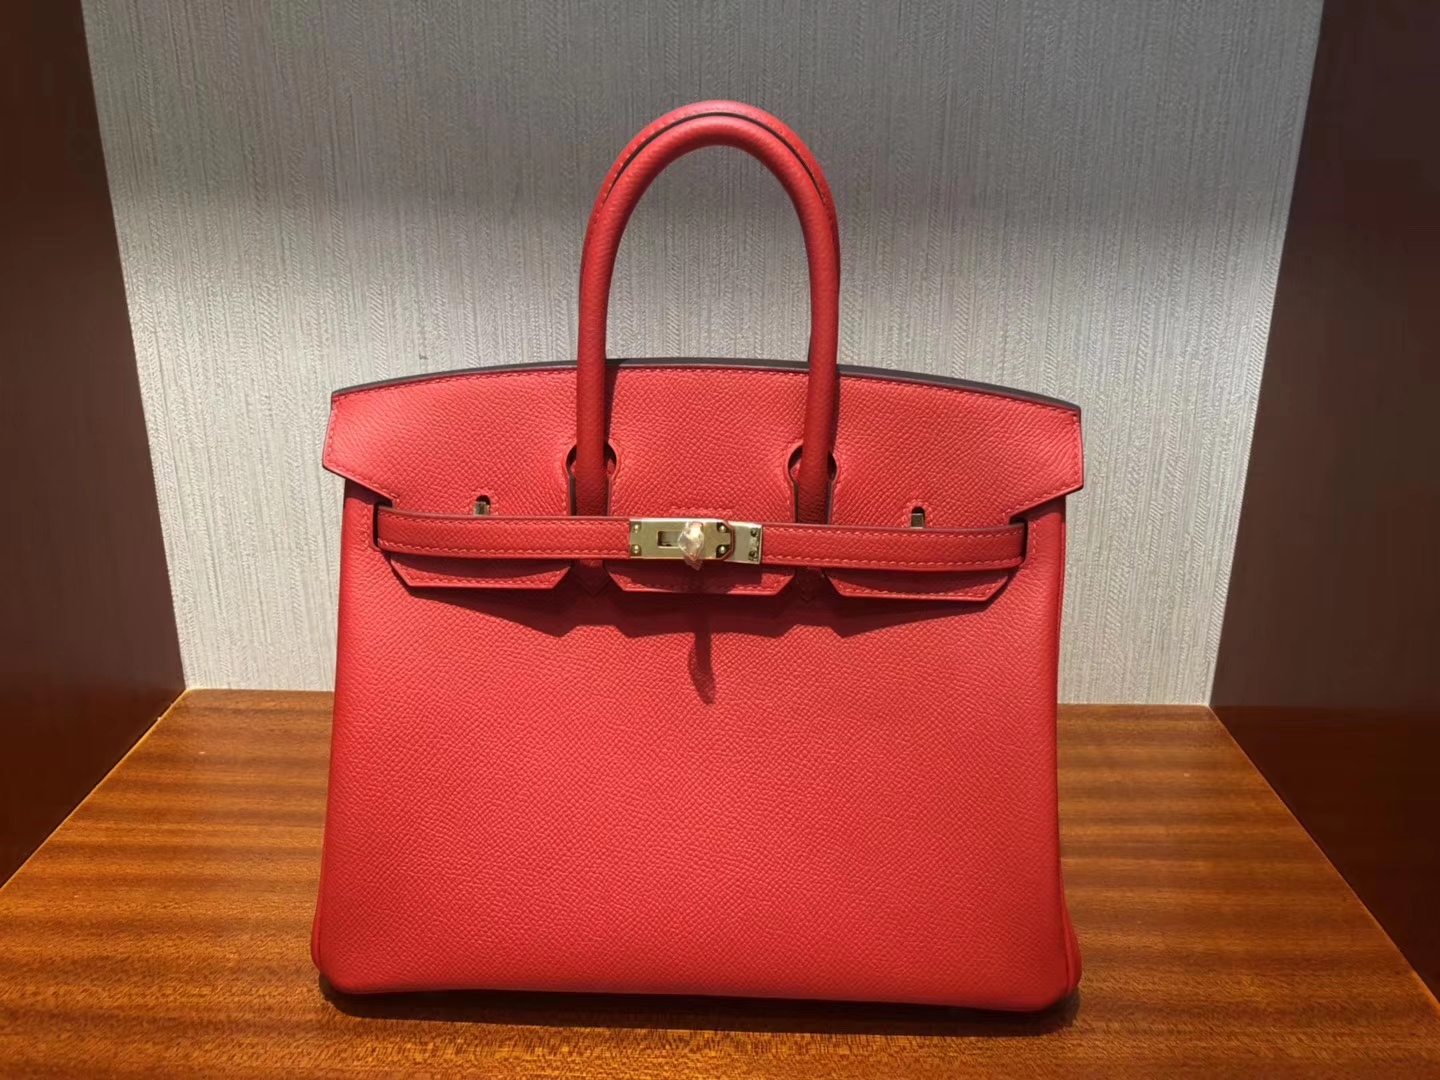 Stock Pretty Hermes 2019 New Color-S3 